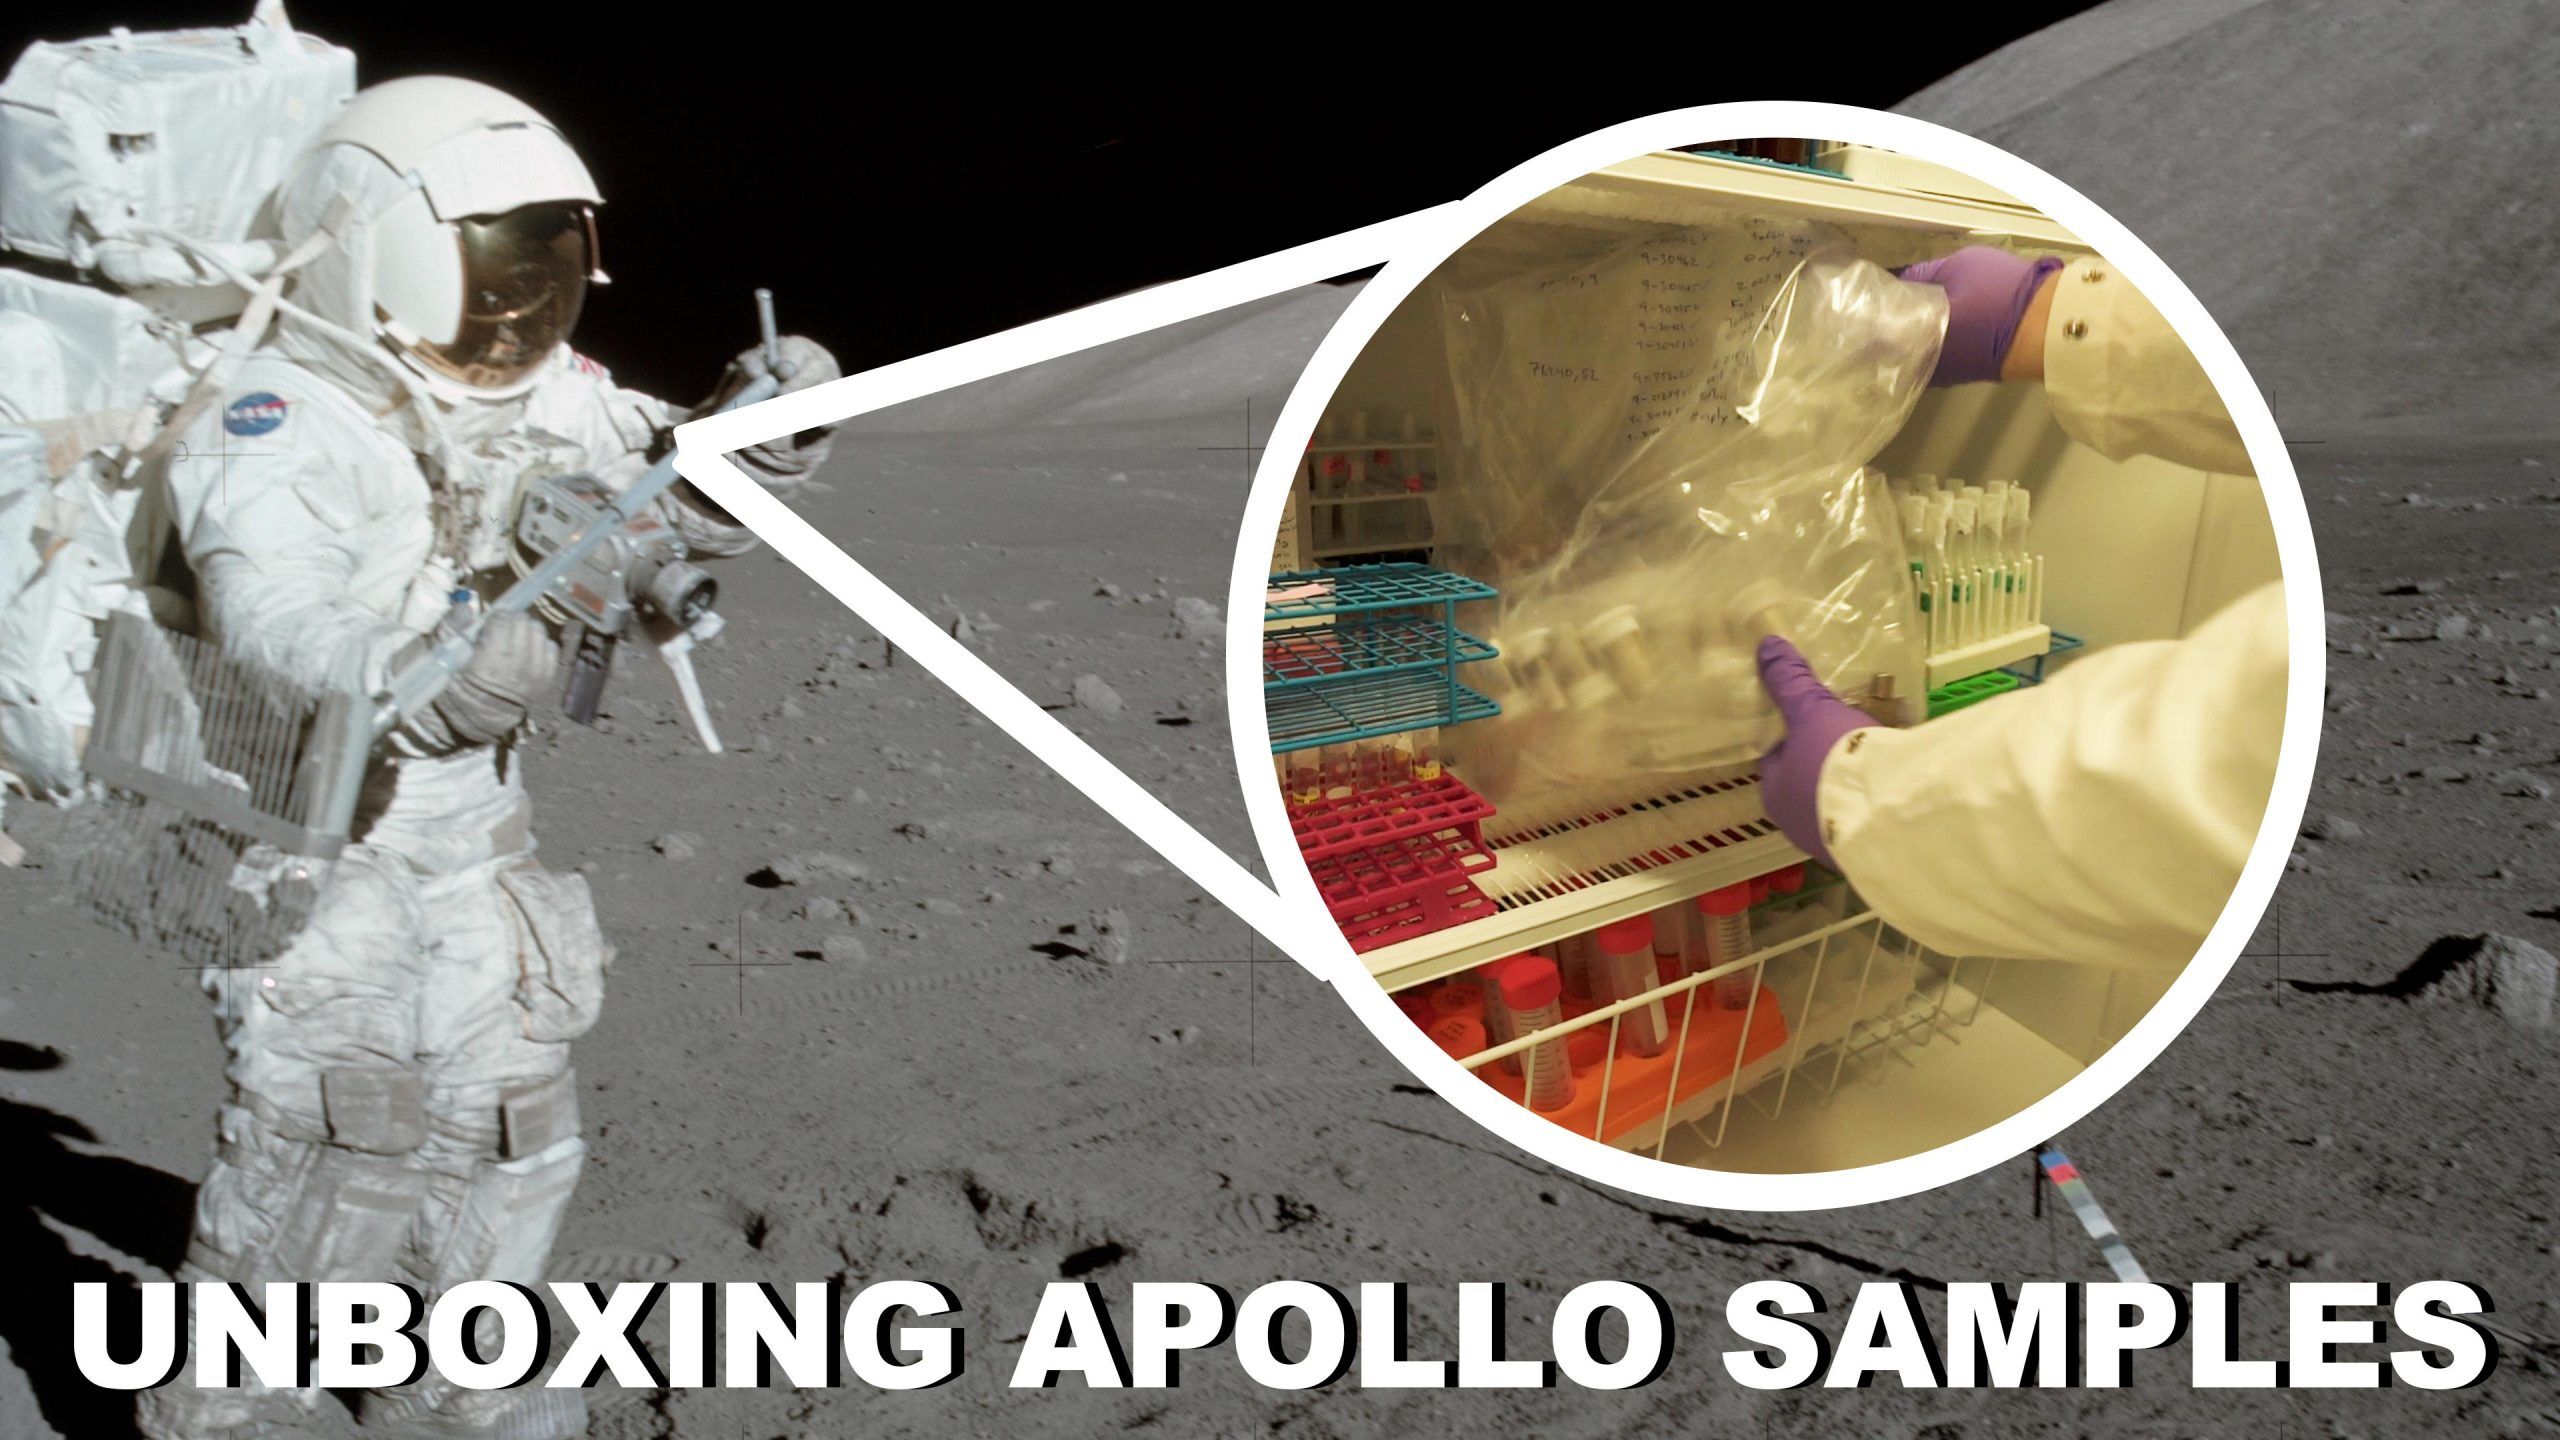 Scientists removing 50 year old lunar samples from the freezer